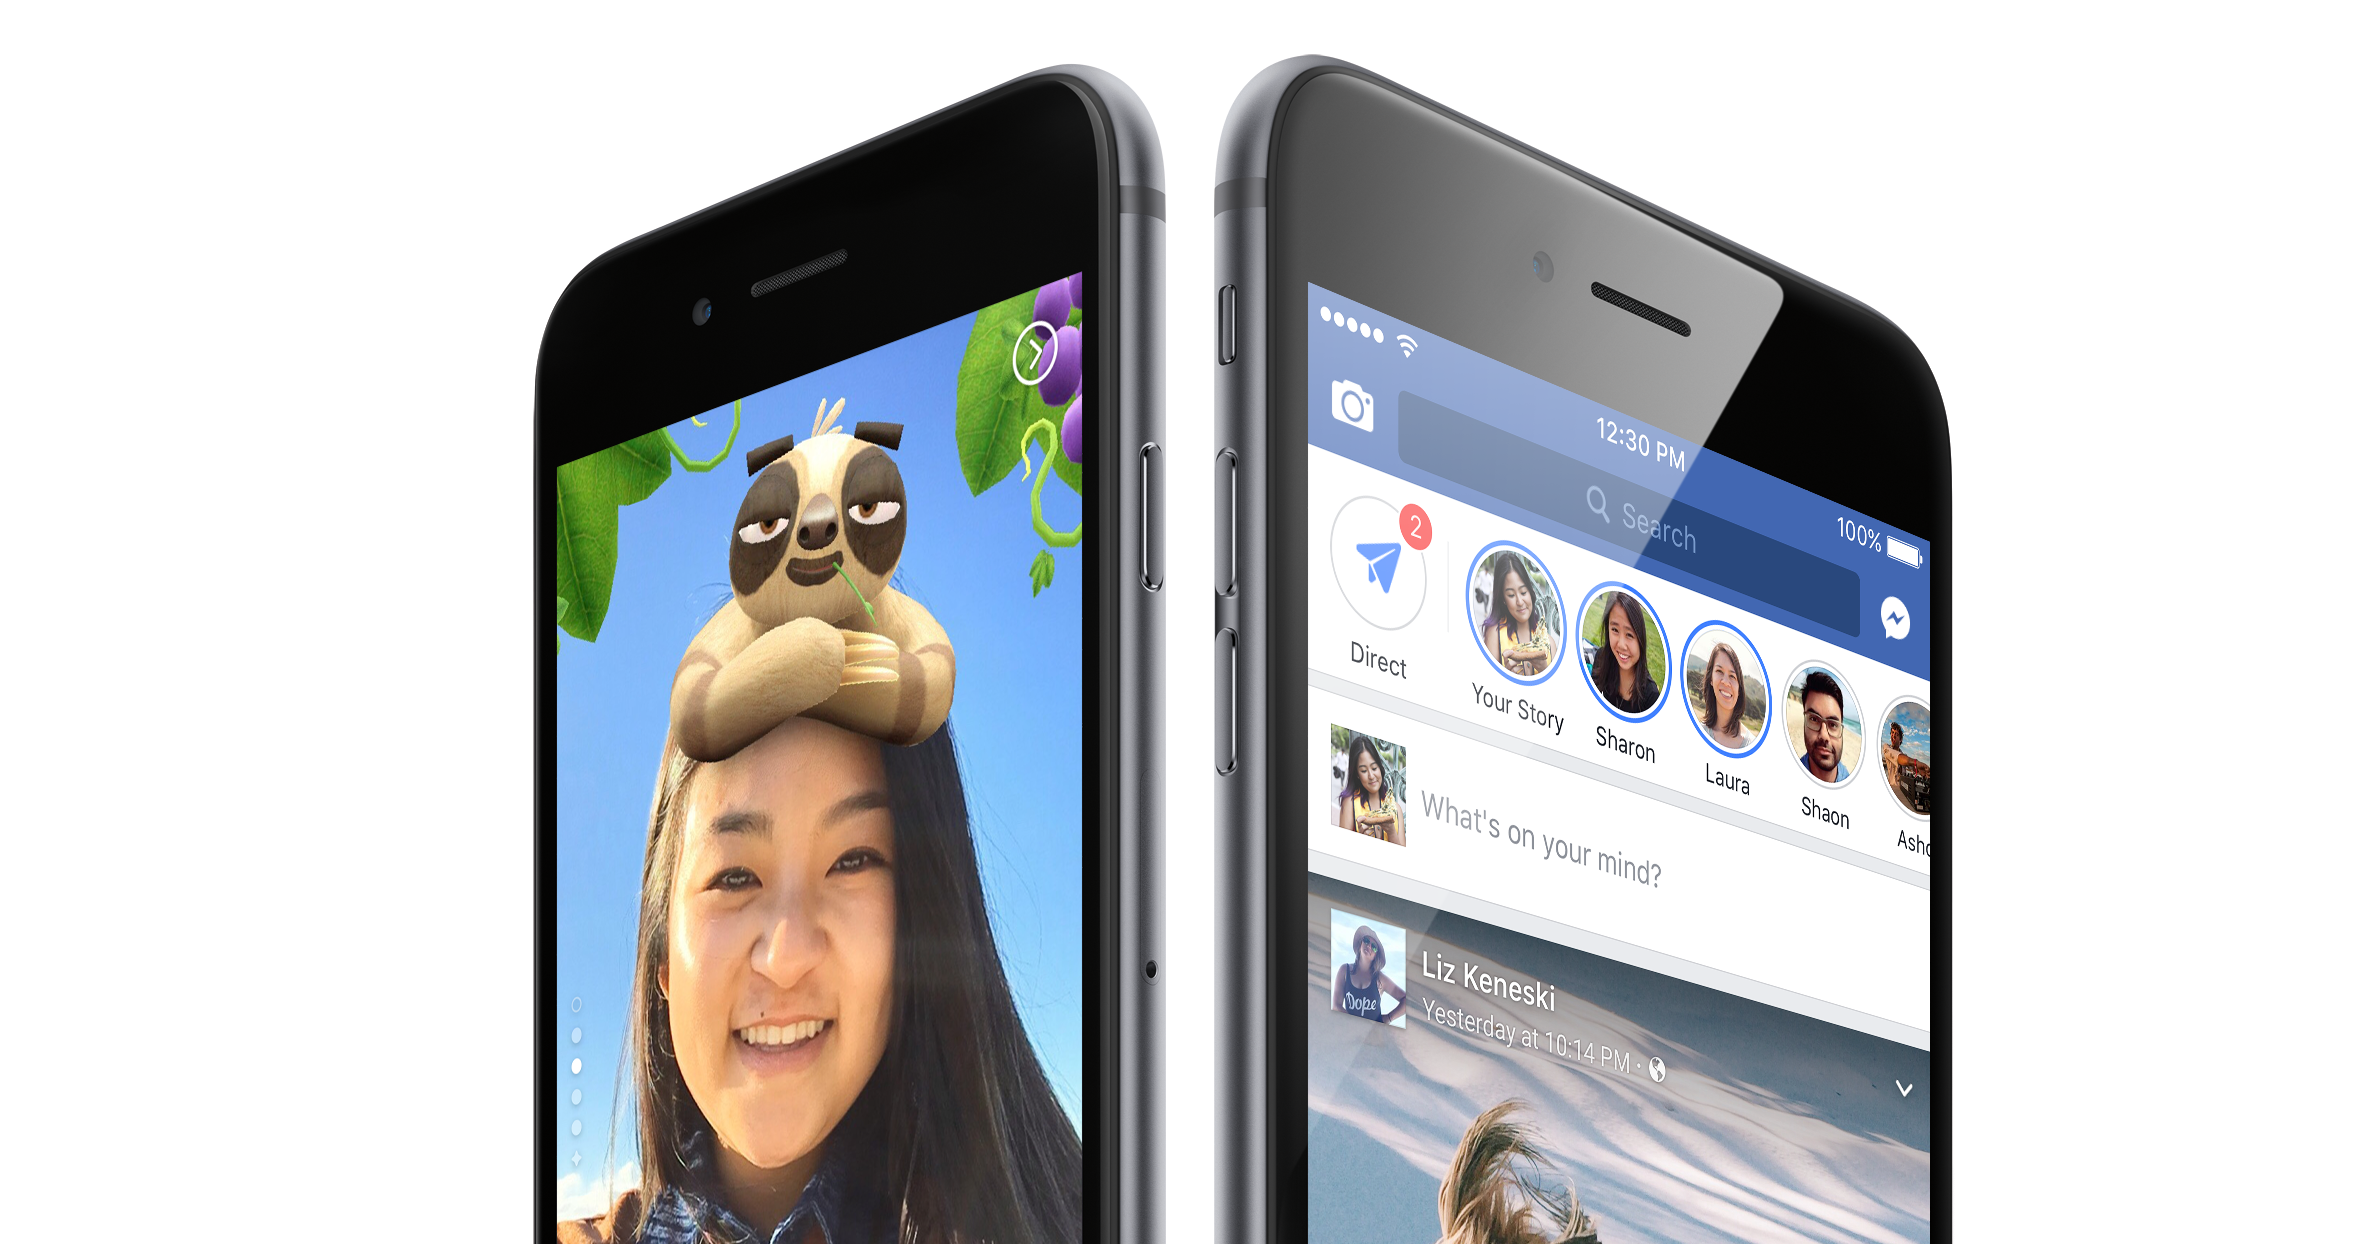 Facebook Stories replaces Messenger Day with synced cross-posting